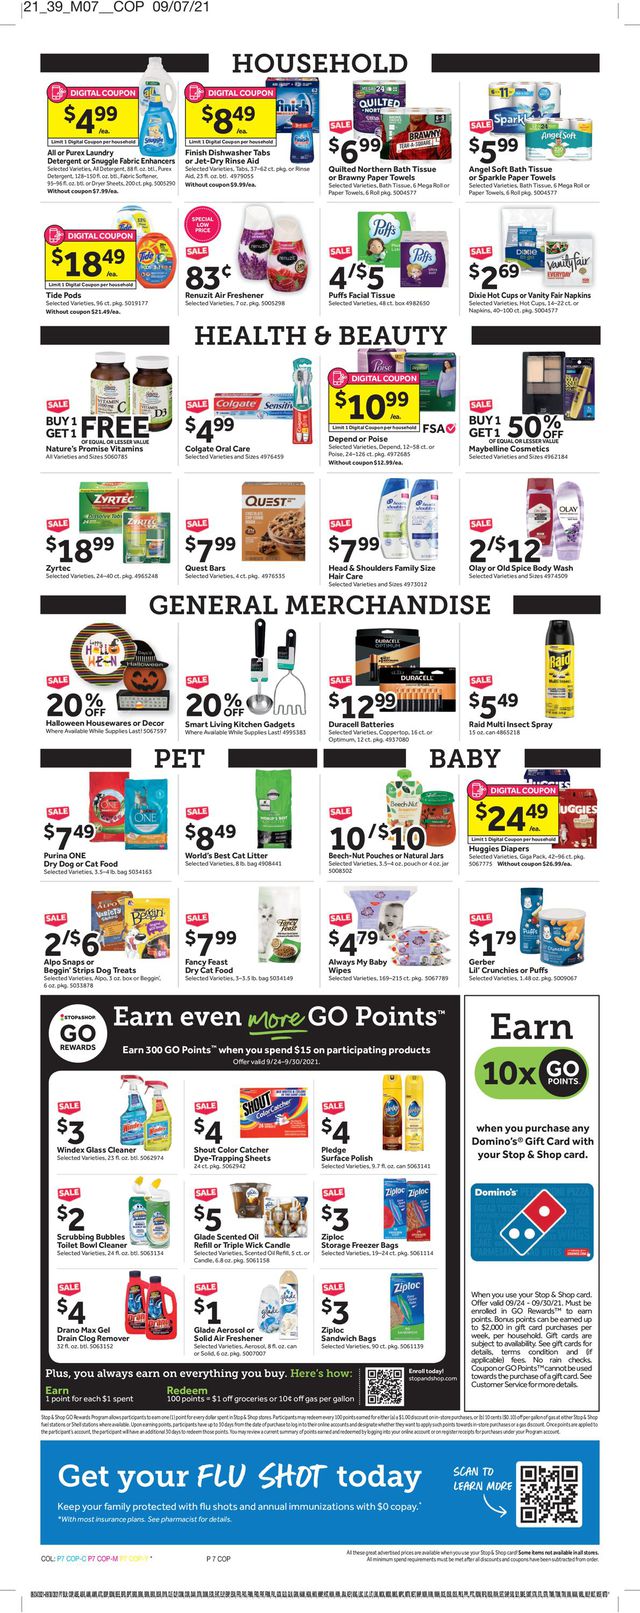 Stop and Shop Ad from 09/24/2021